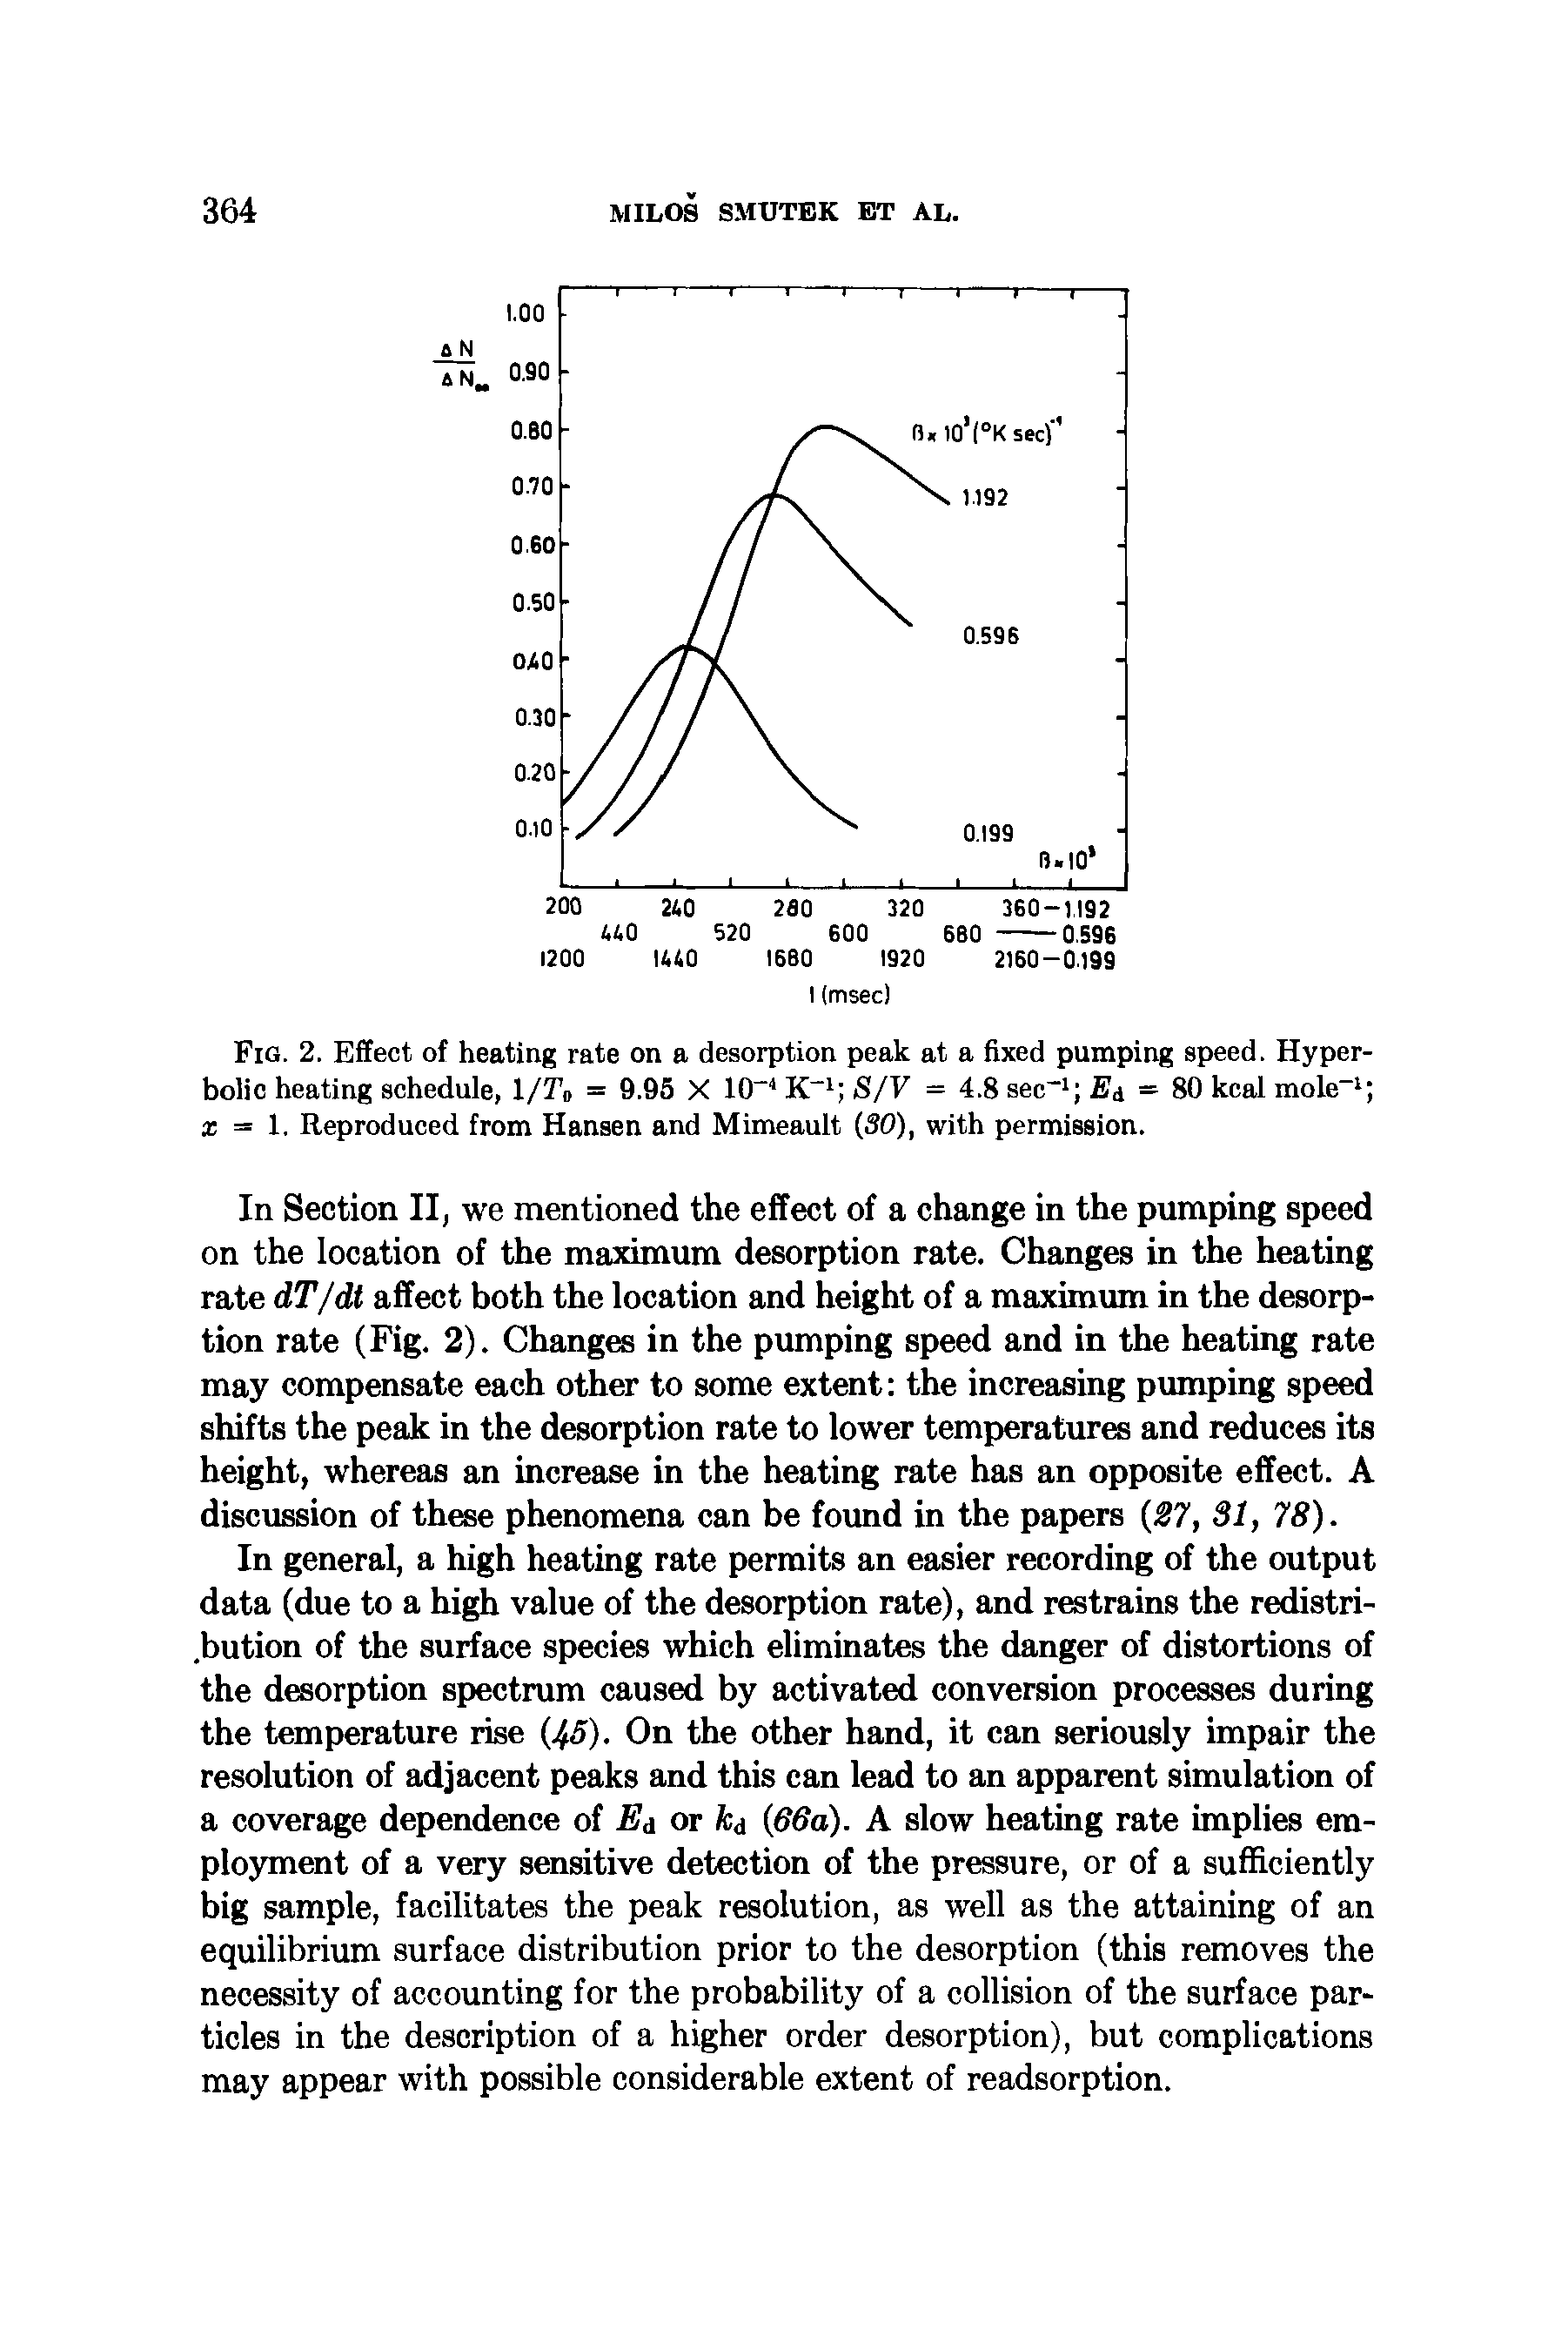 Fig. 2. Effect of heating rate on a desorption peak at a fixed pumping speed. Hyperbolic heating schedule, l/To = 9.95 X 10-1 K-1 S/V = 4.8 sec-1 E — 80 kcal mole-1 x = 1. Reproduced from Hansen and Mimeault (30), with permission.